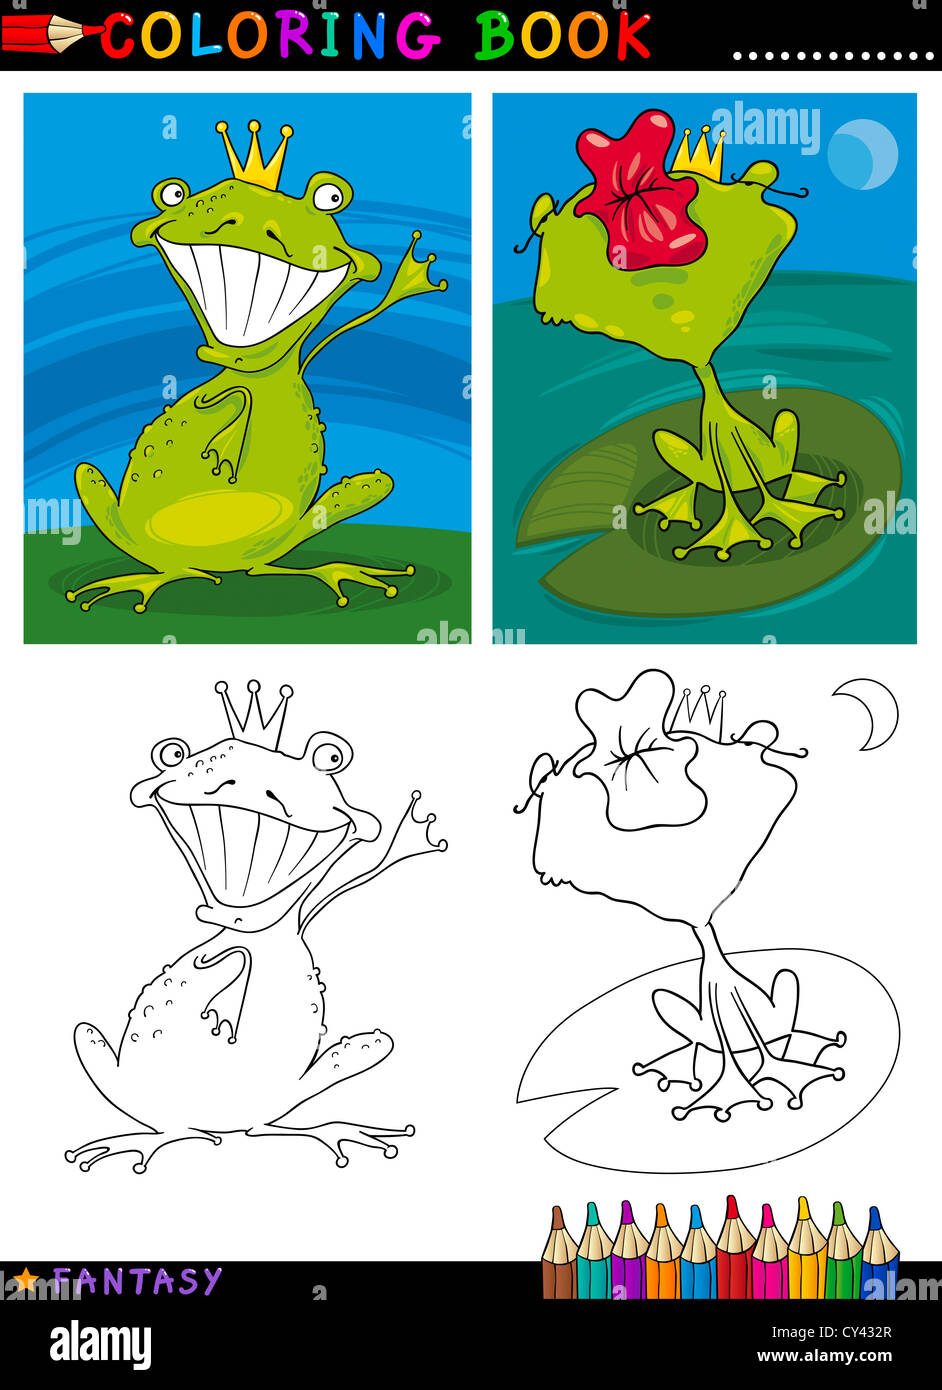 Coloring Book or Page Cartoon Illustration of Frog Prince Fairytale Characters Stock Photo